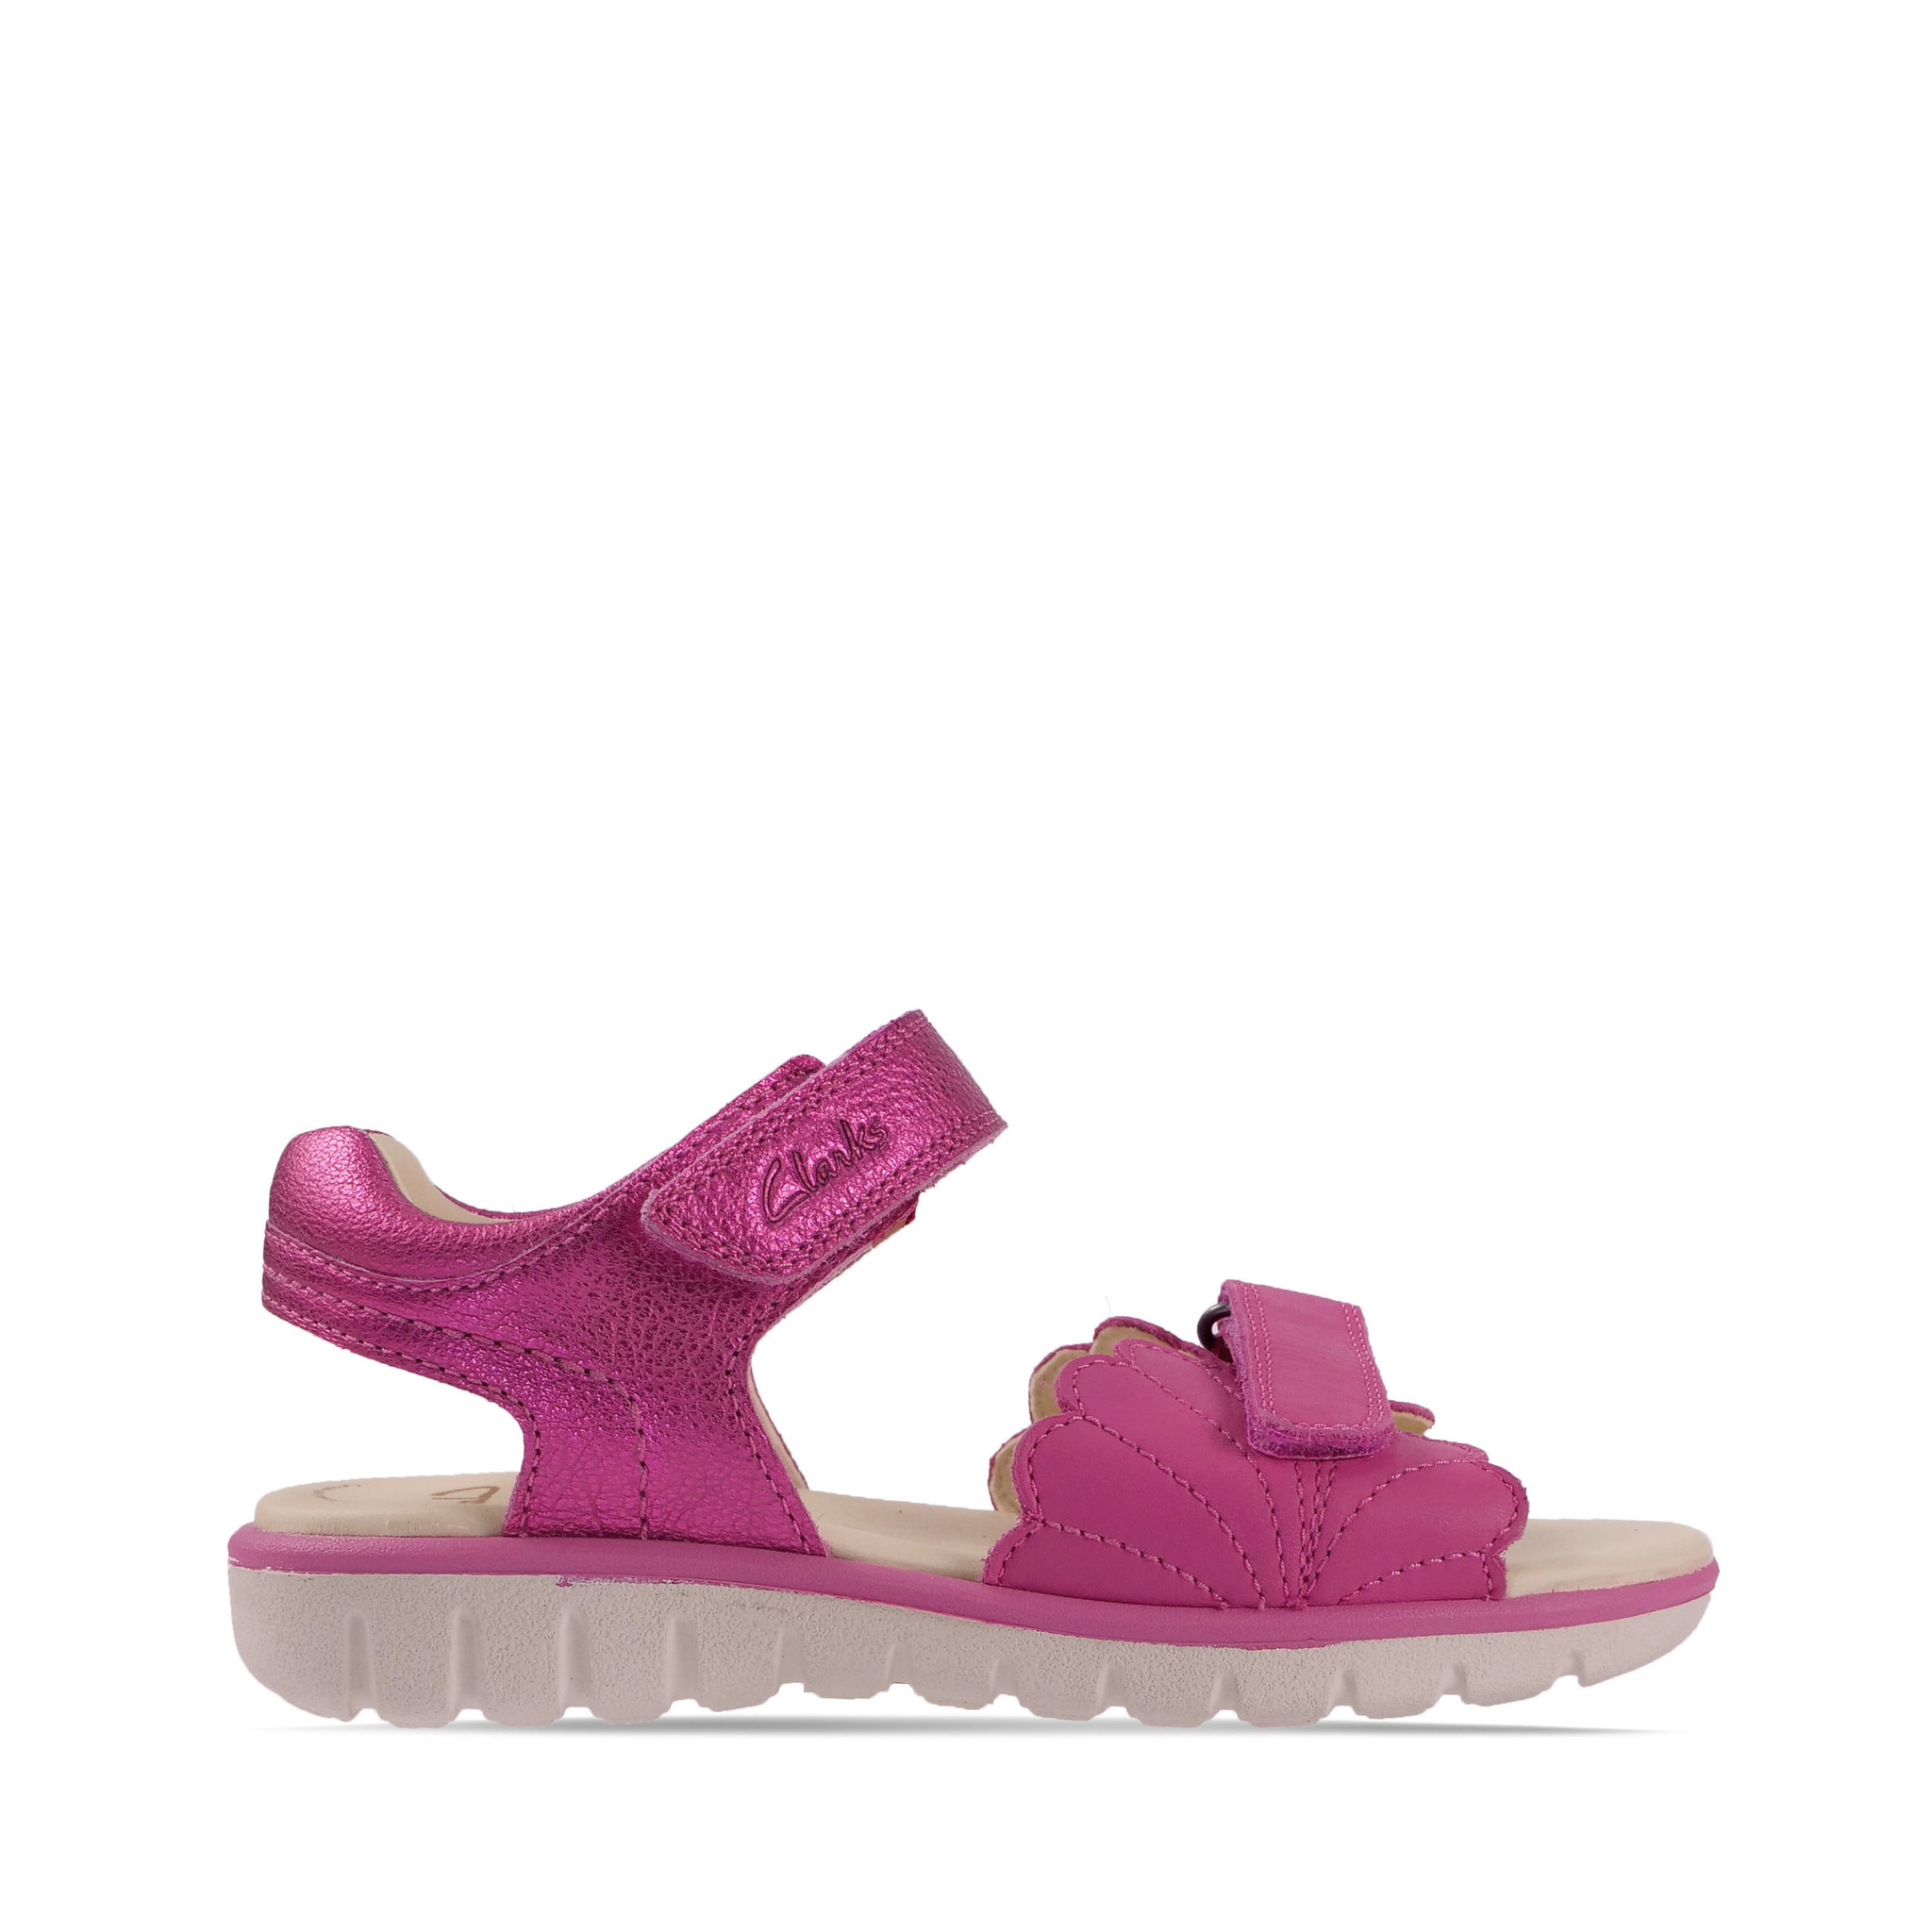 Clarks Roam Wing Pink Leather Infant